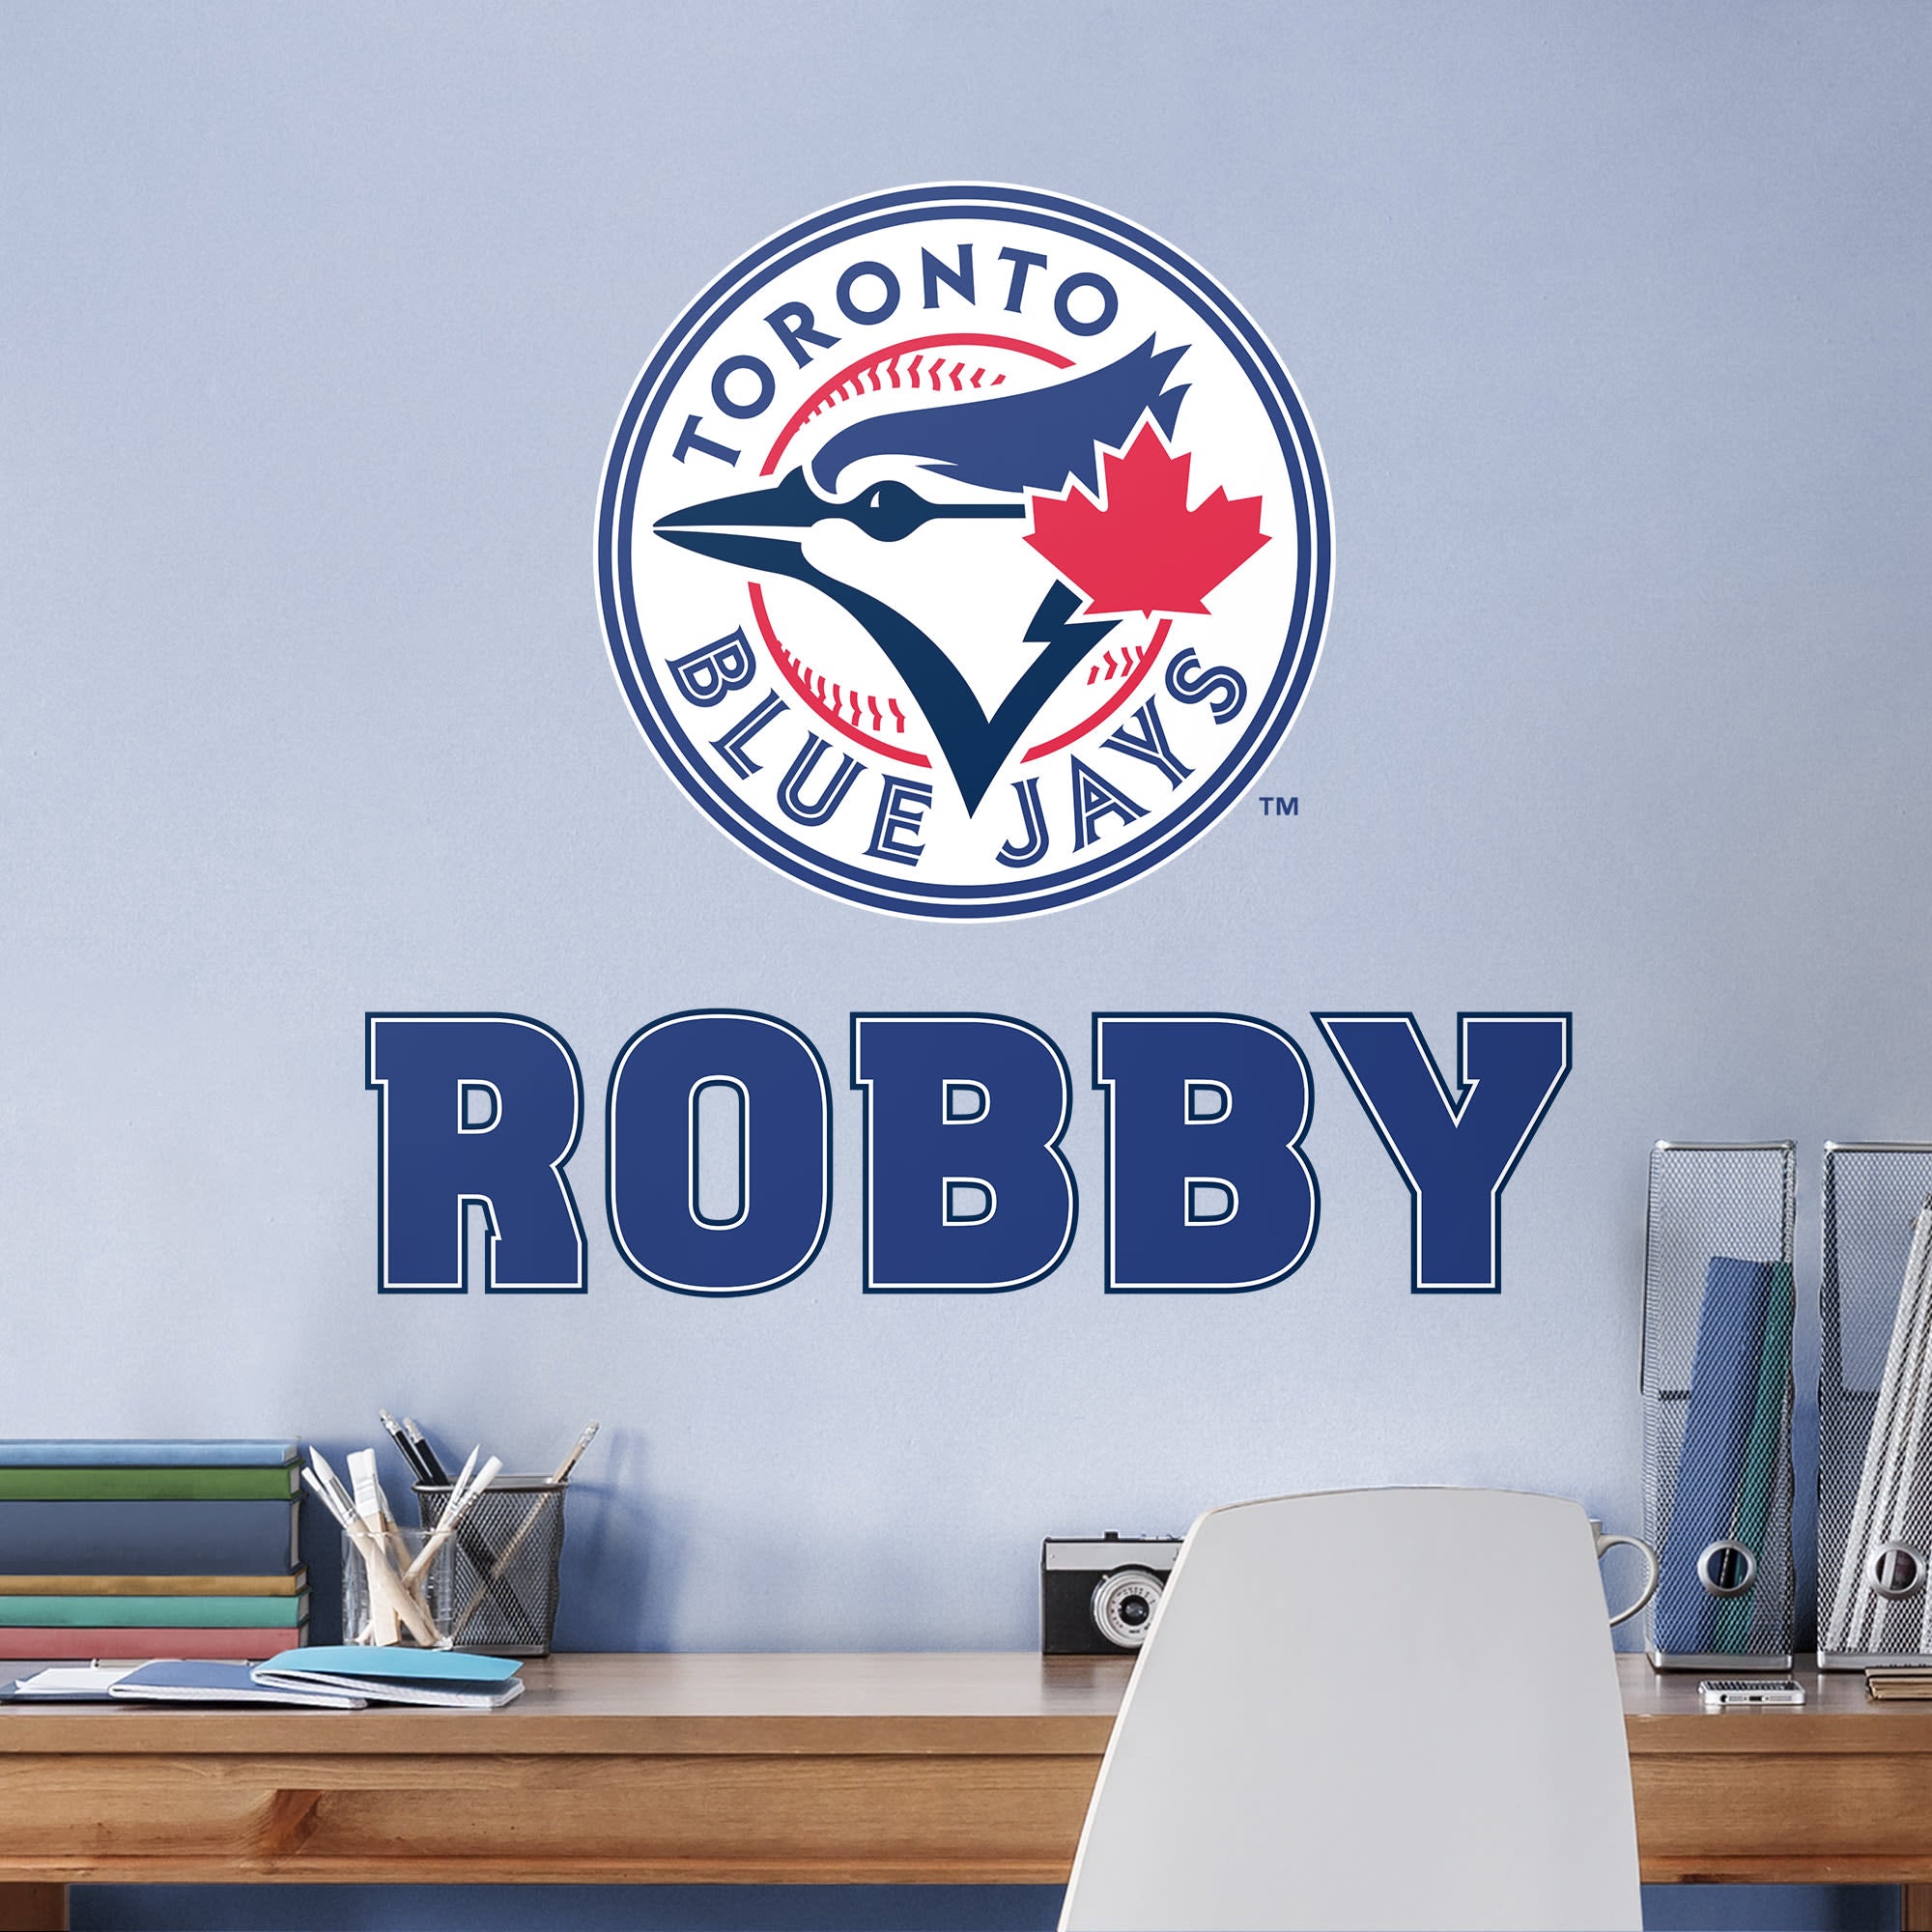 Toronto Blue Jays: Stacked Personalized Name - Officially Licensed MLB Transfer Decal in Blue (52"W x 39.5"H) by Fathead | Vinyl